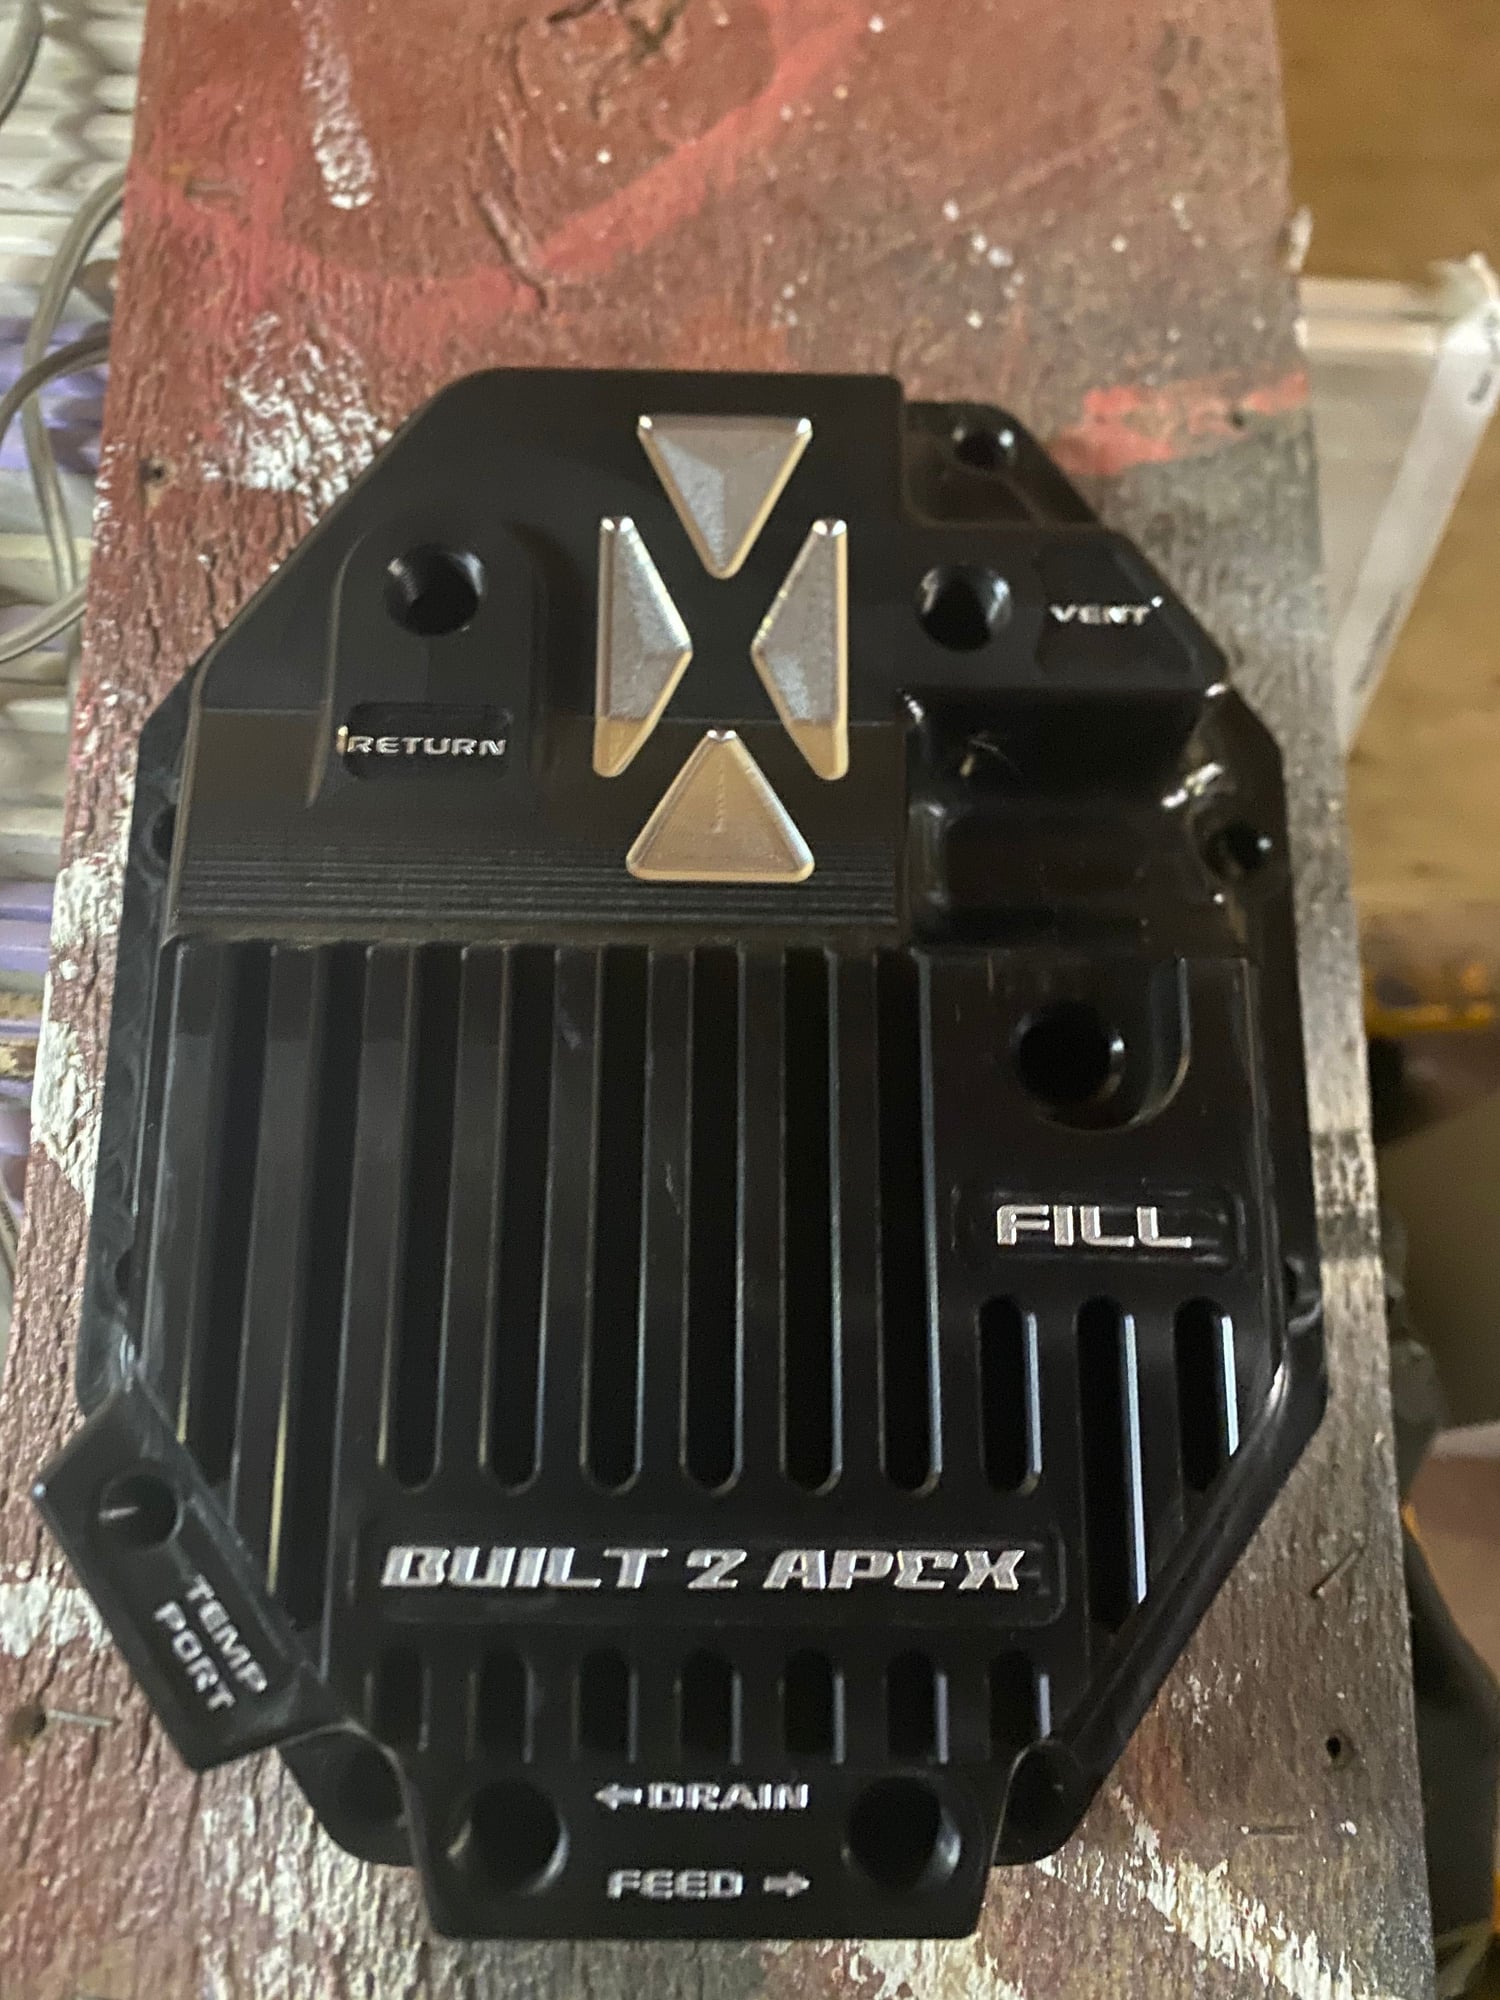 Drivetrain - Built 2 apex transmission pan and diff cover - New - 1993 to 1995 Mazda RX-7 - Methuen, MA 08144, United States